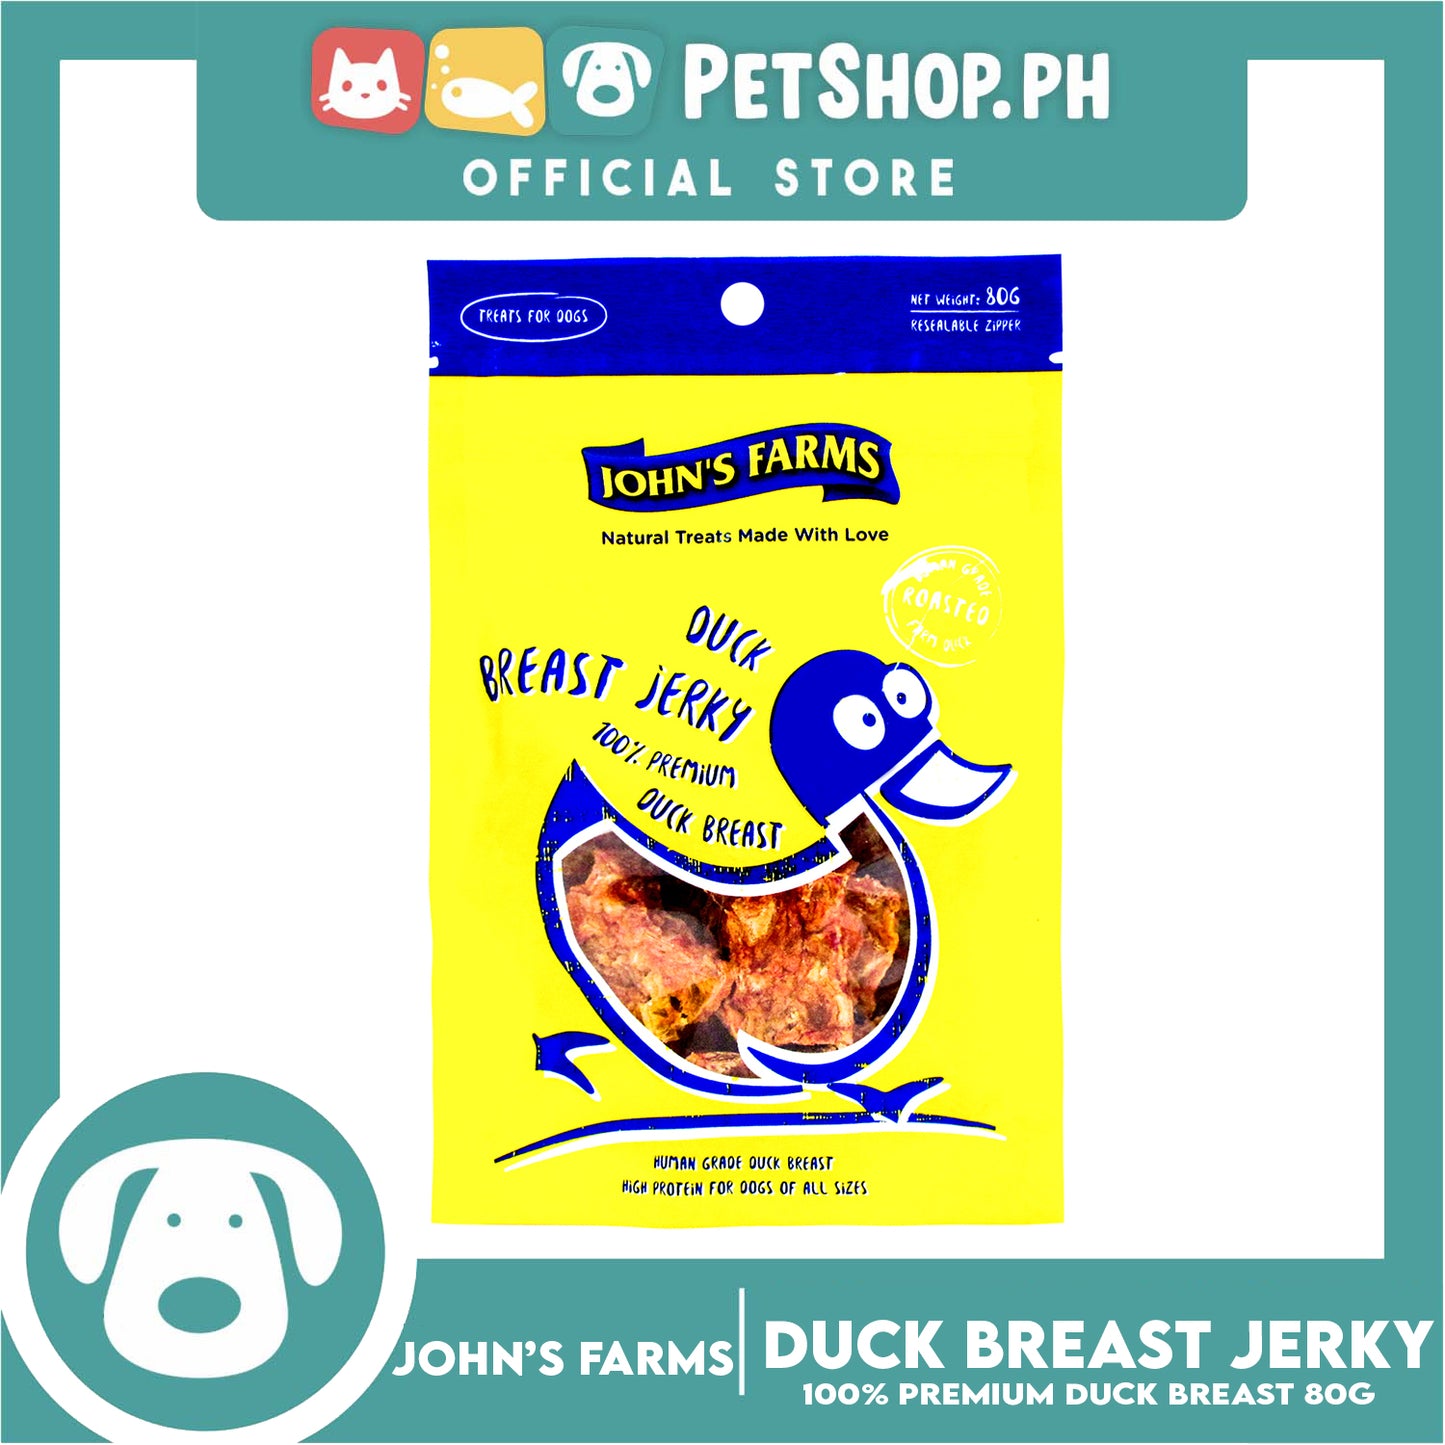 John's Farms Dog Food, High Protein For Dogs Of All Sizes, Resealable Zipper 80g (Duck Breast Jerky) Dog Treats